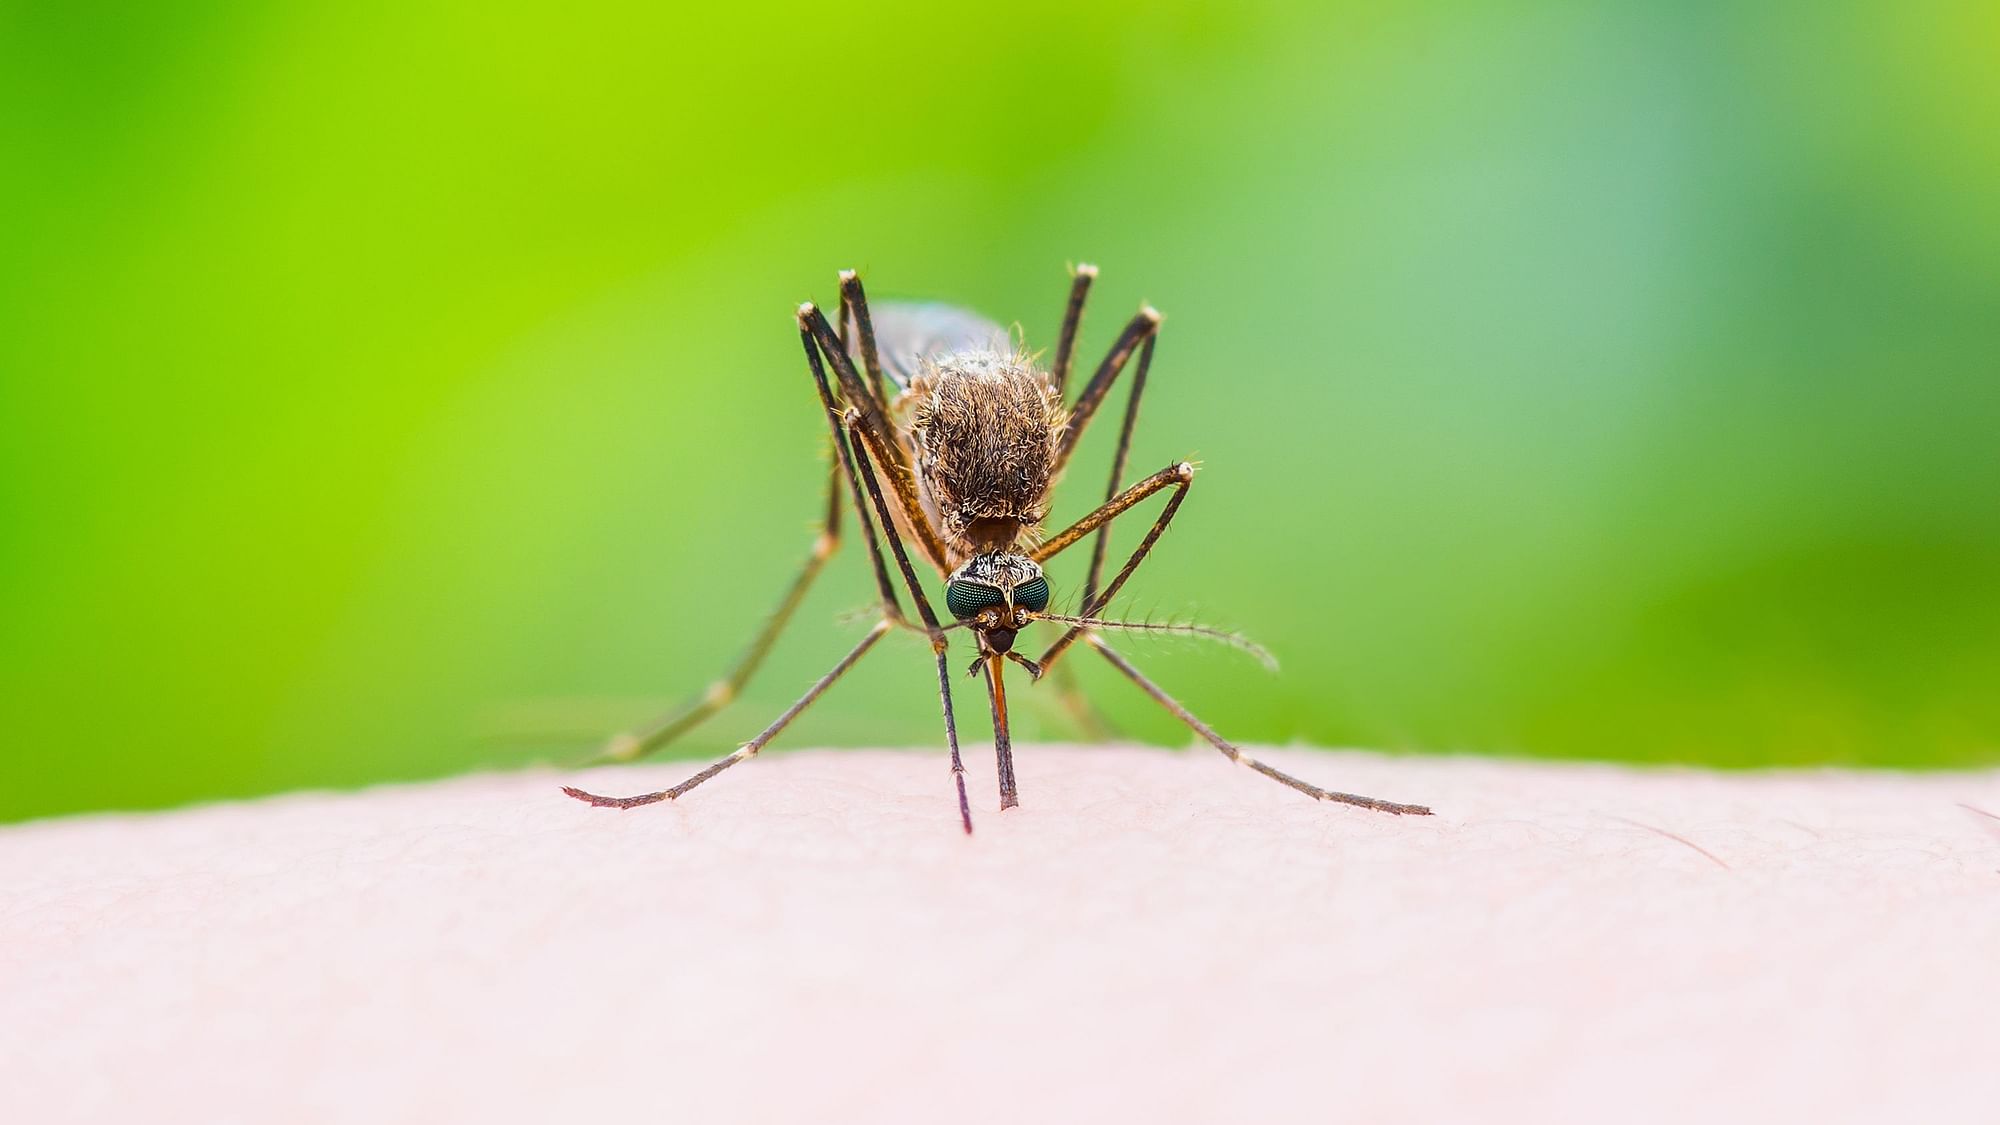 Dengue is ravaging Southeast Asia this year due in part to rising temperatures and low immunity to new strains.